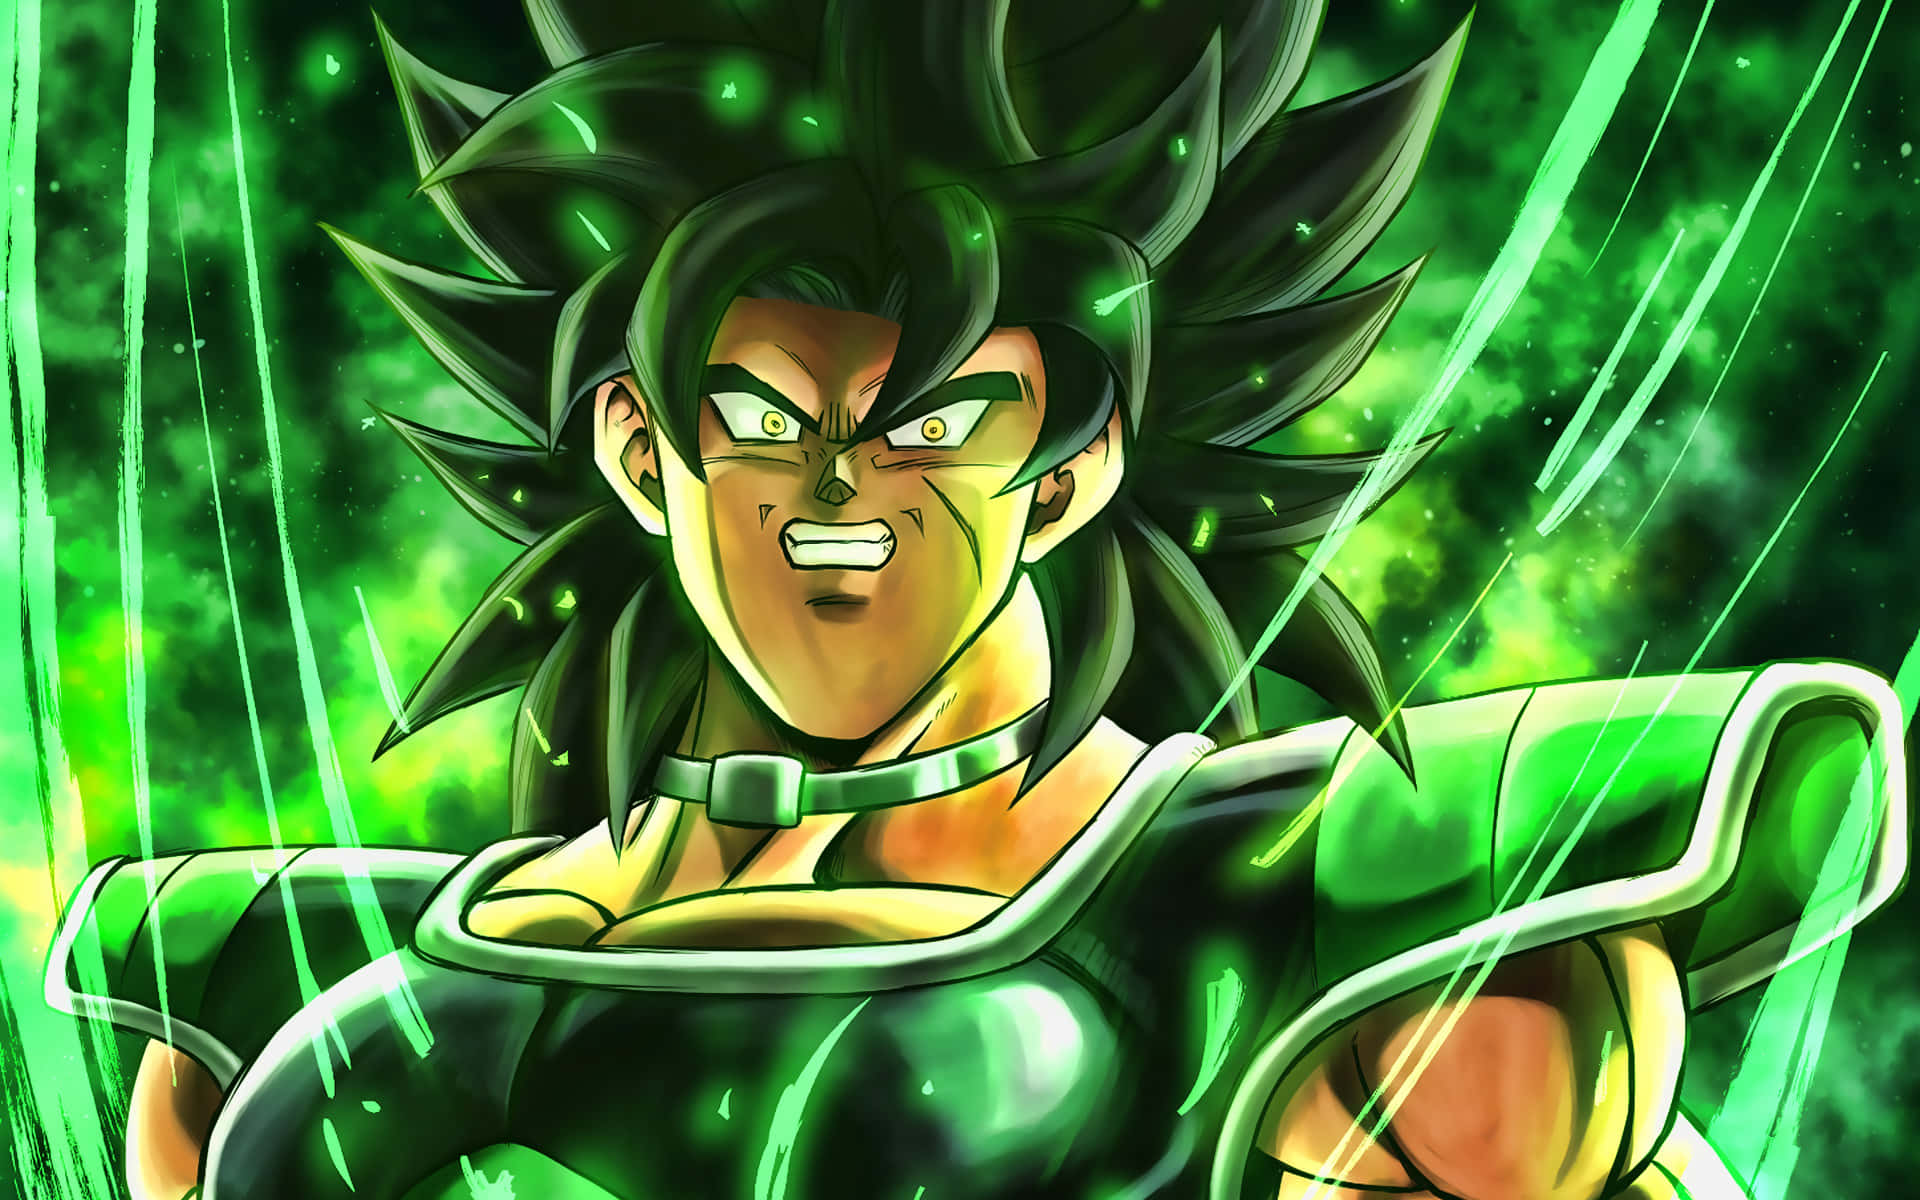 Get ready to follow the epic journey of Goku and Vegeta in Dragon Ball Super Broly!